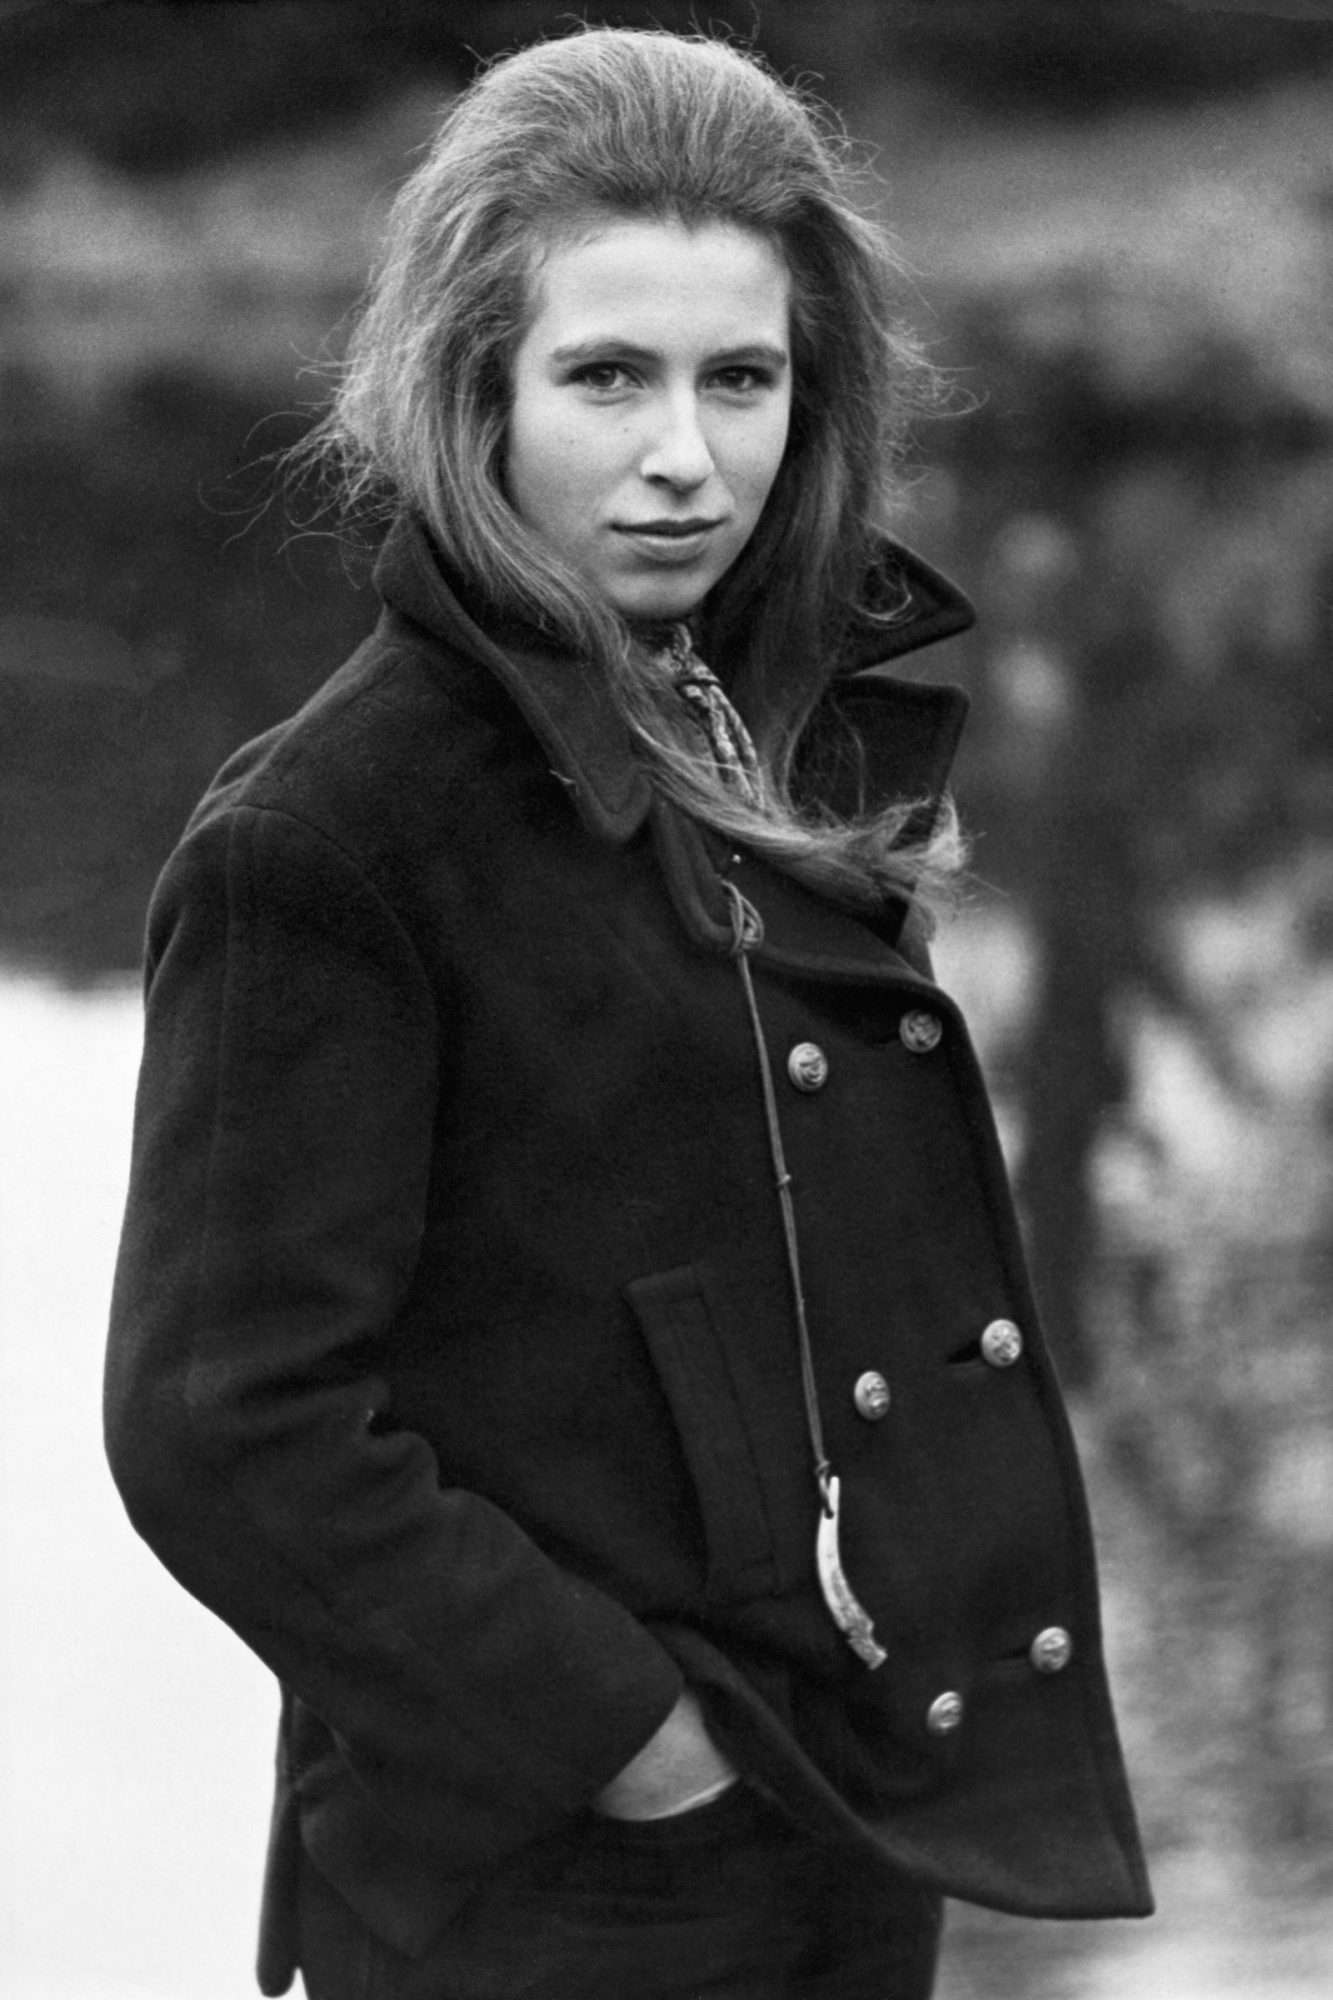 Princess Anne in the grounds of Sandringham, before the 1969 Royal Tour of Australia and New Zealand.